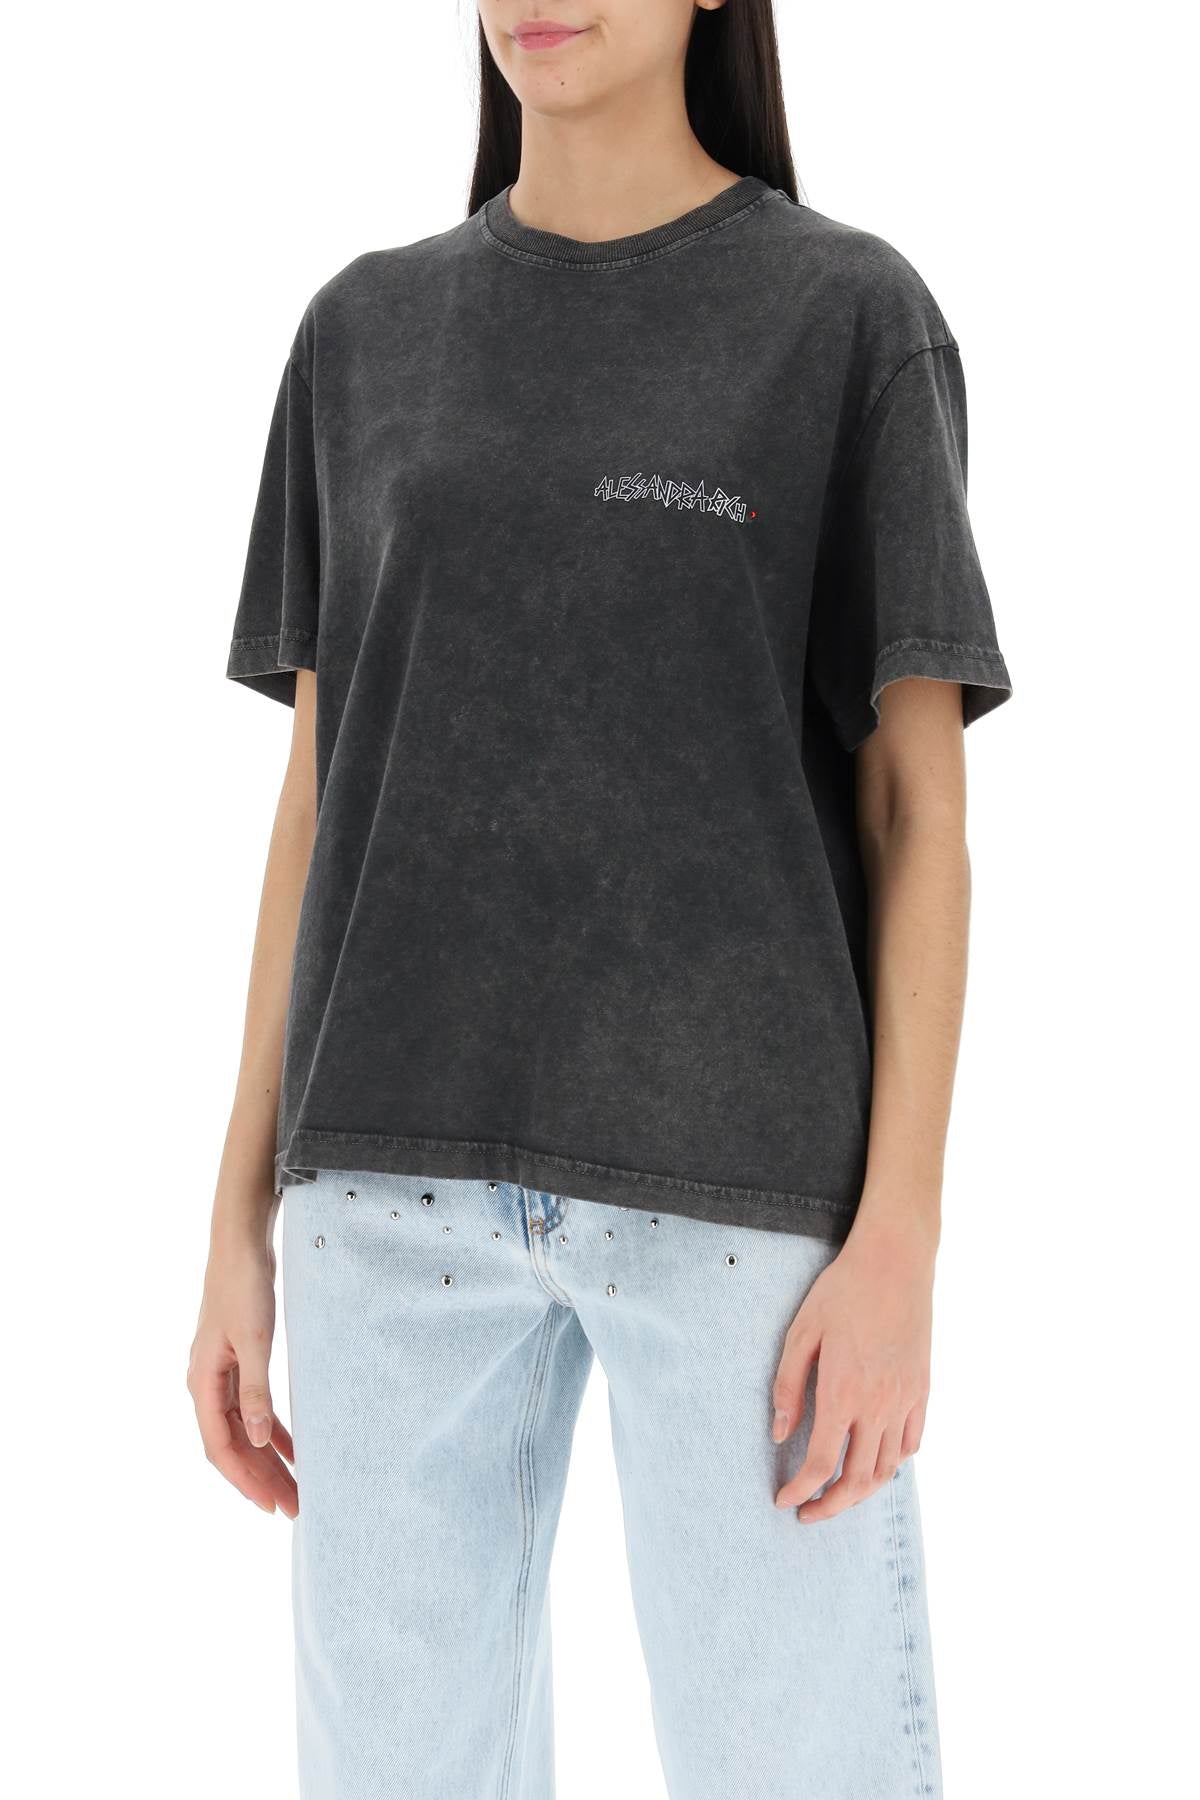 Alessandra rich oversized t-shirt with print and rhinestones-3